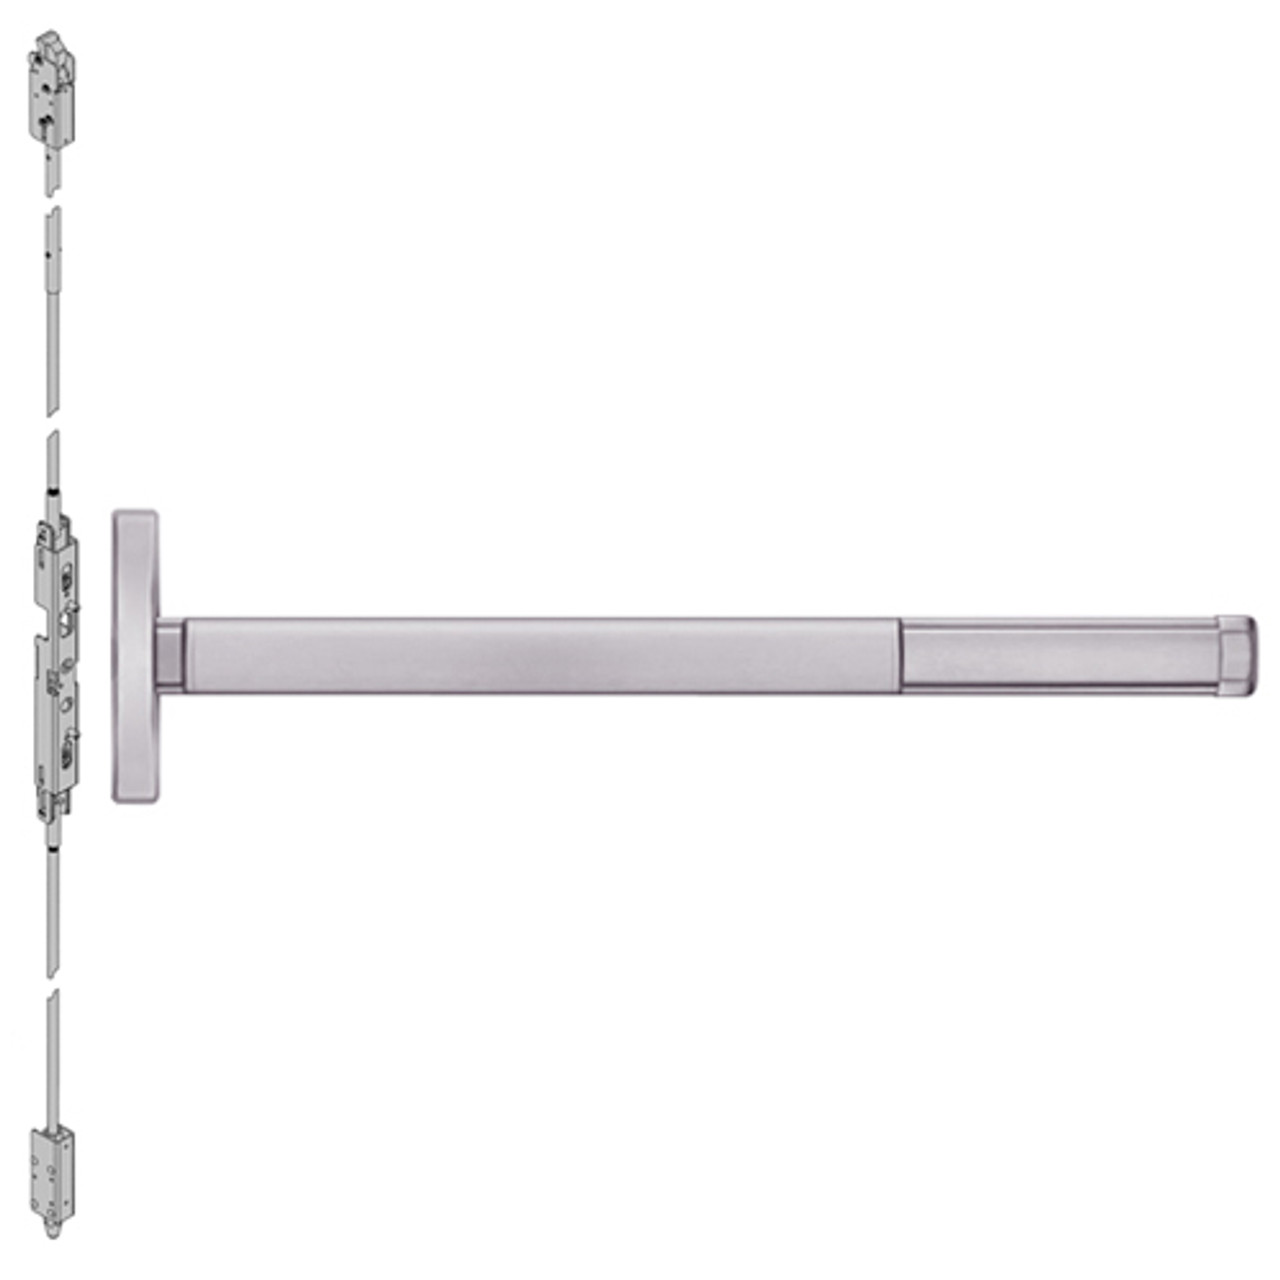 DE2603LBR-630-36 PHI 2600 Series Concealed Vertical Rod Exit Device with Delayed Egress Prepped for Key Retracts Latchbolt in Satin Stainless Steel Finish